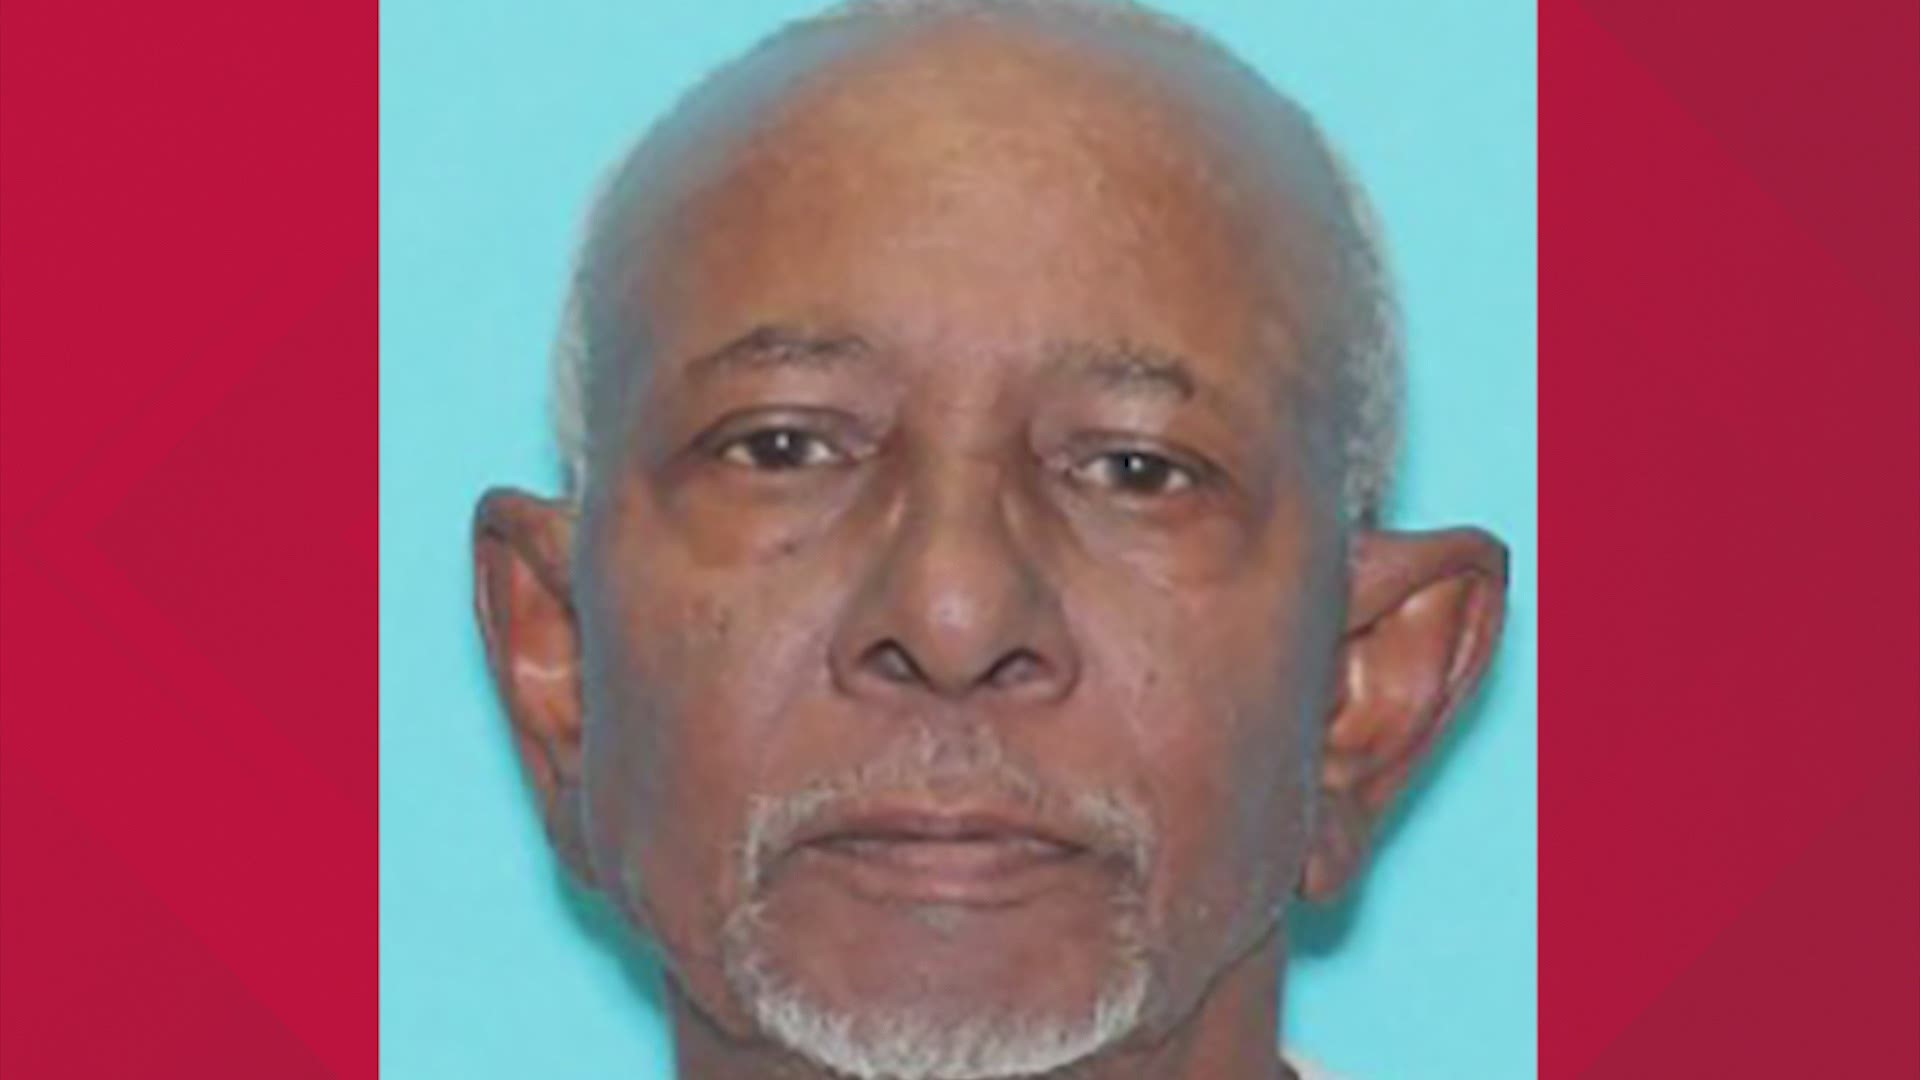 If you see Clyde Jones or know if his location, you're asked to call the Harris County Precinct 1 Constable Office at 713-755-7628.